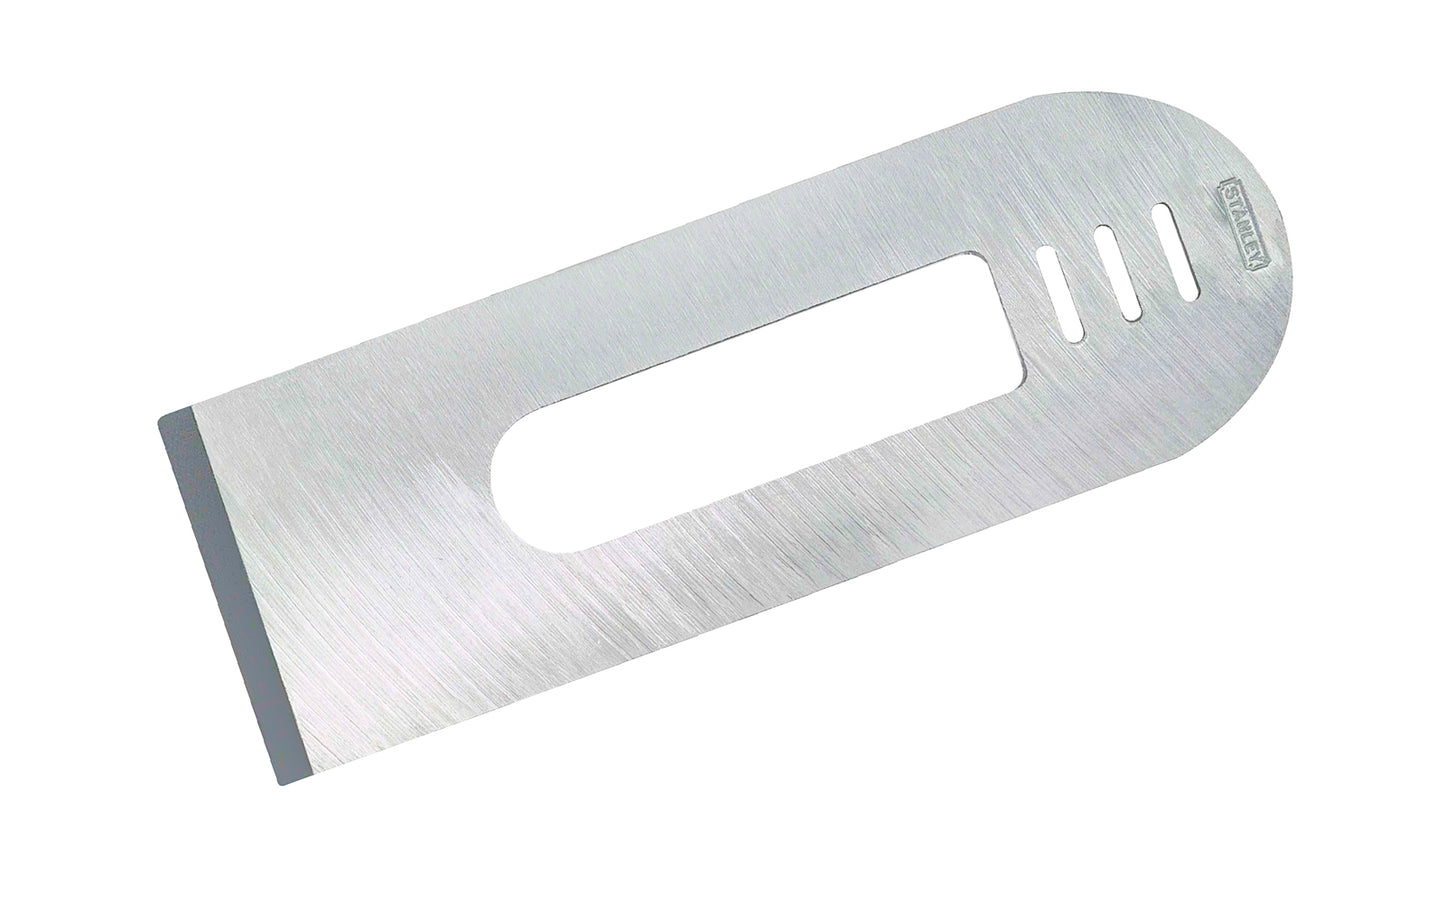 Model 12-504 - 0-12-504 ~ 1-3/8" (35 mm) wide cutter blade ~ Hardened, tempered high-carbon chrome steel gives excellent edge retention - Can be honed to a razor-sharp edge ~ Ground to a flat surface ~ Ground edge of 25°; finish with honed angle of 30° is recommended - 076174125047 - Replacement Stanley Iron Blade